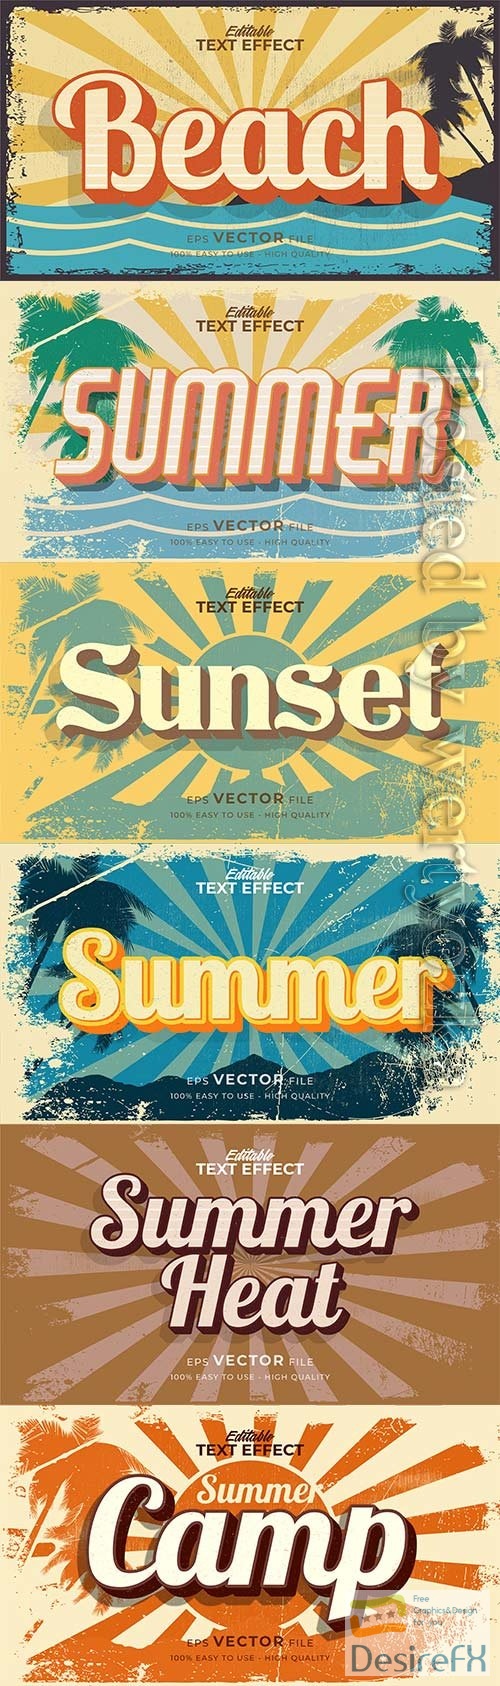 Text style effect, retro summer text in grunge style